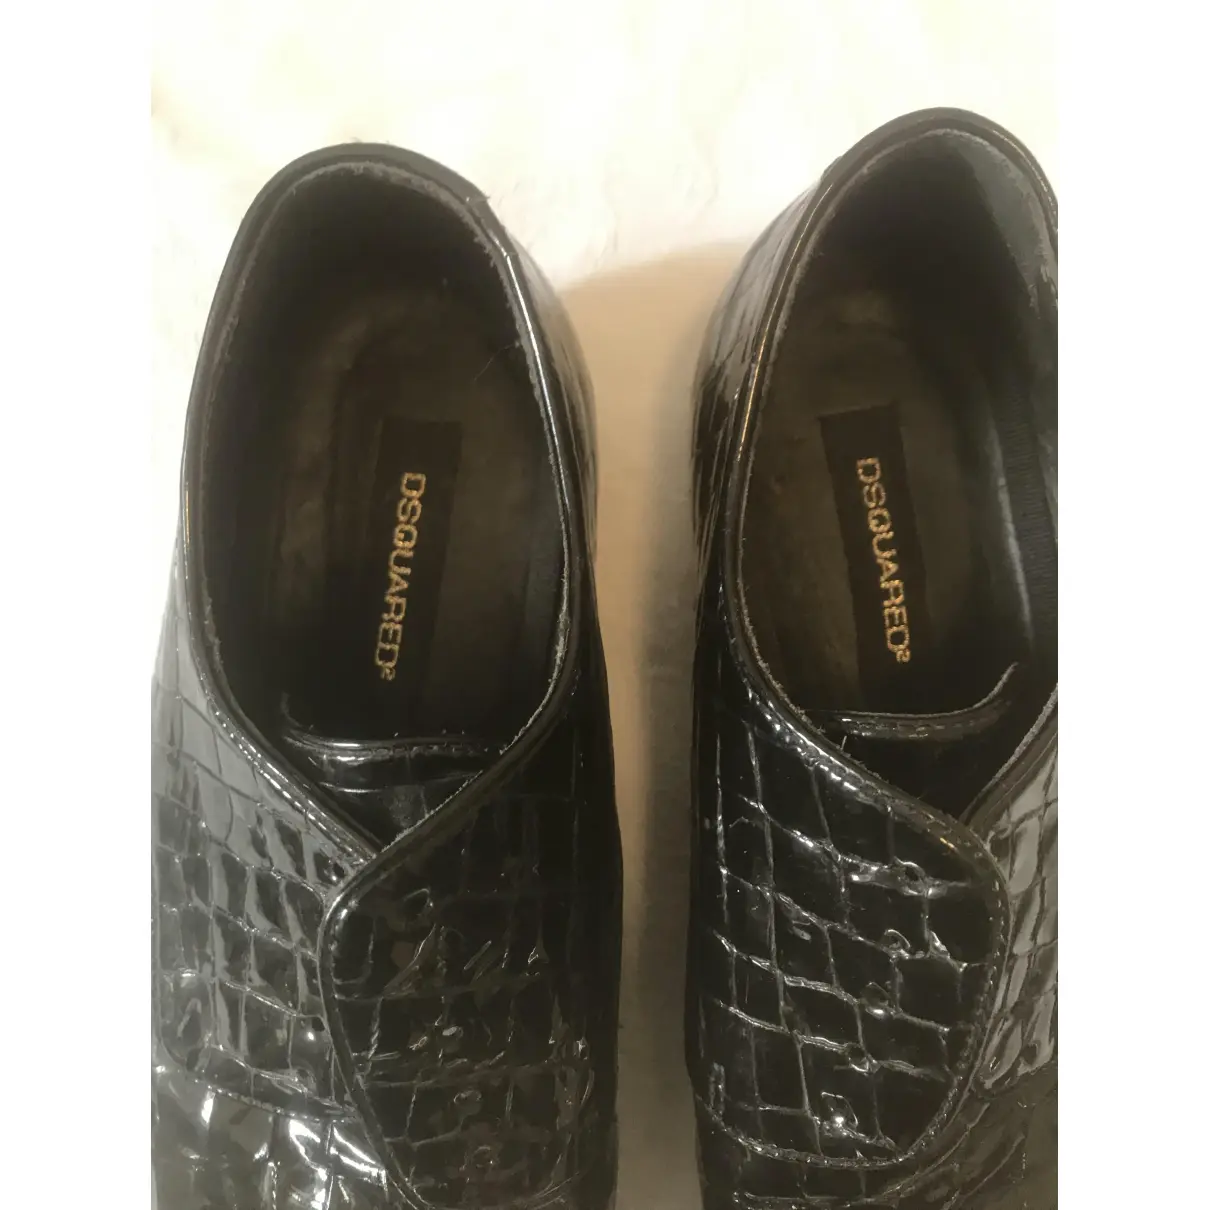 Patent leather lace ups Dsquared2